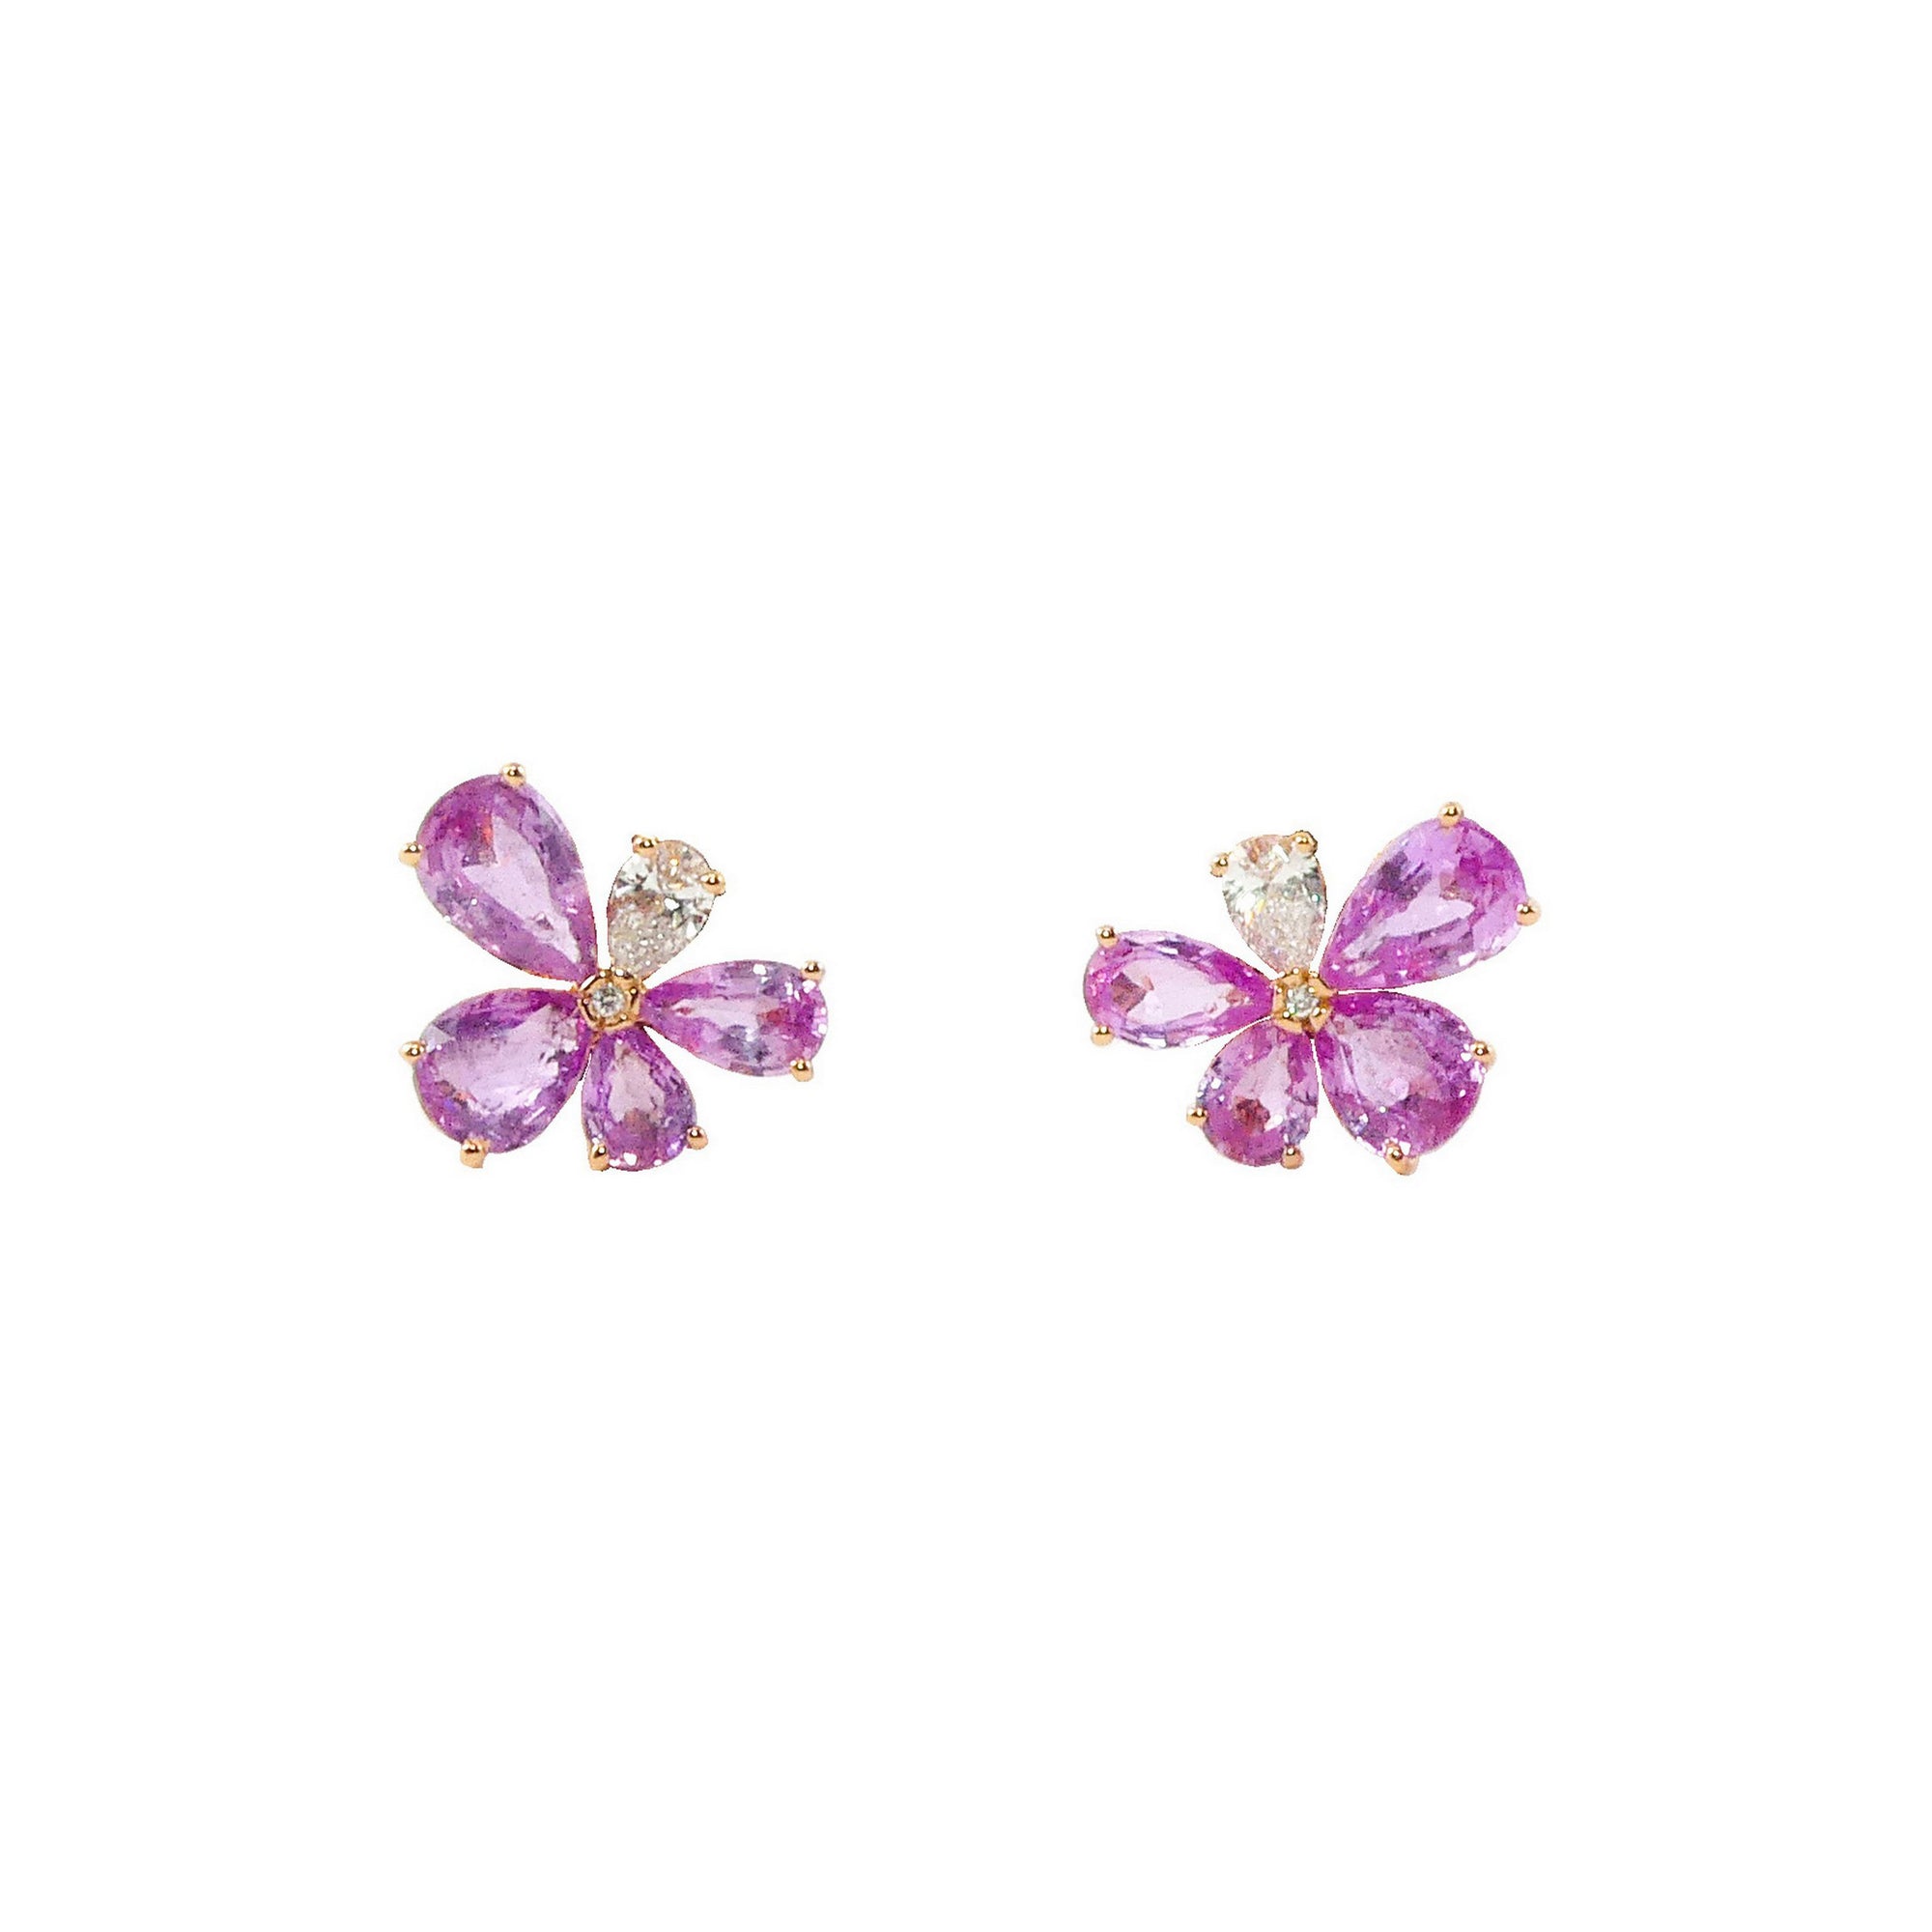 Prato Fiorito Rose Gold Earrings With Pink Sapphires Diamonds